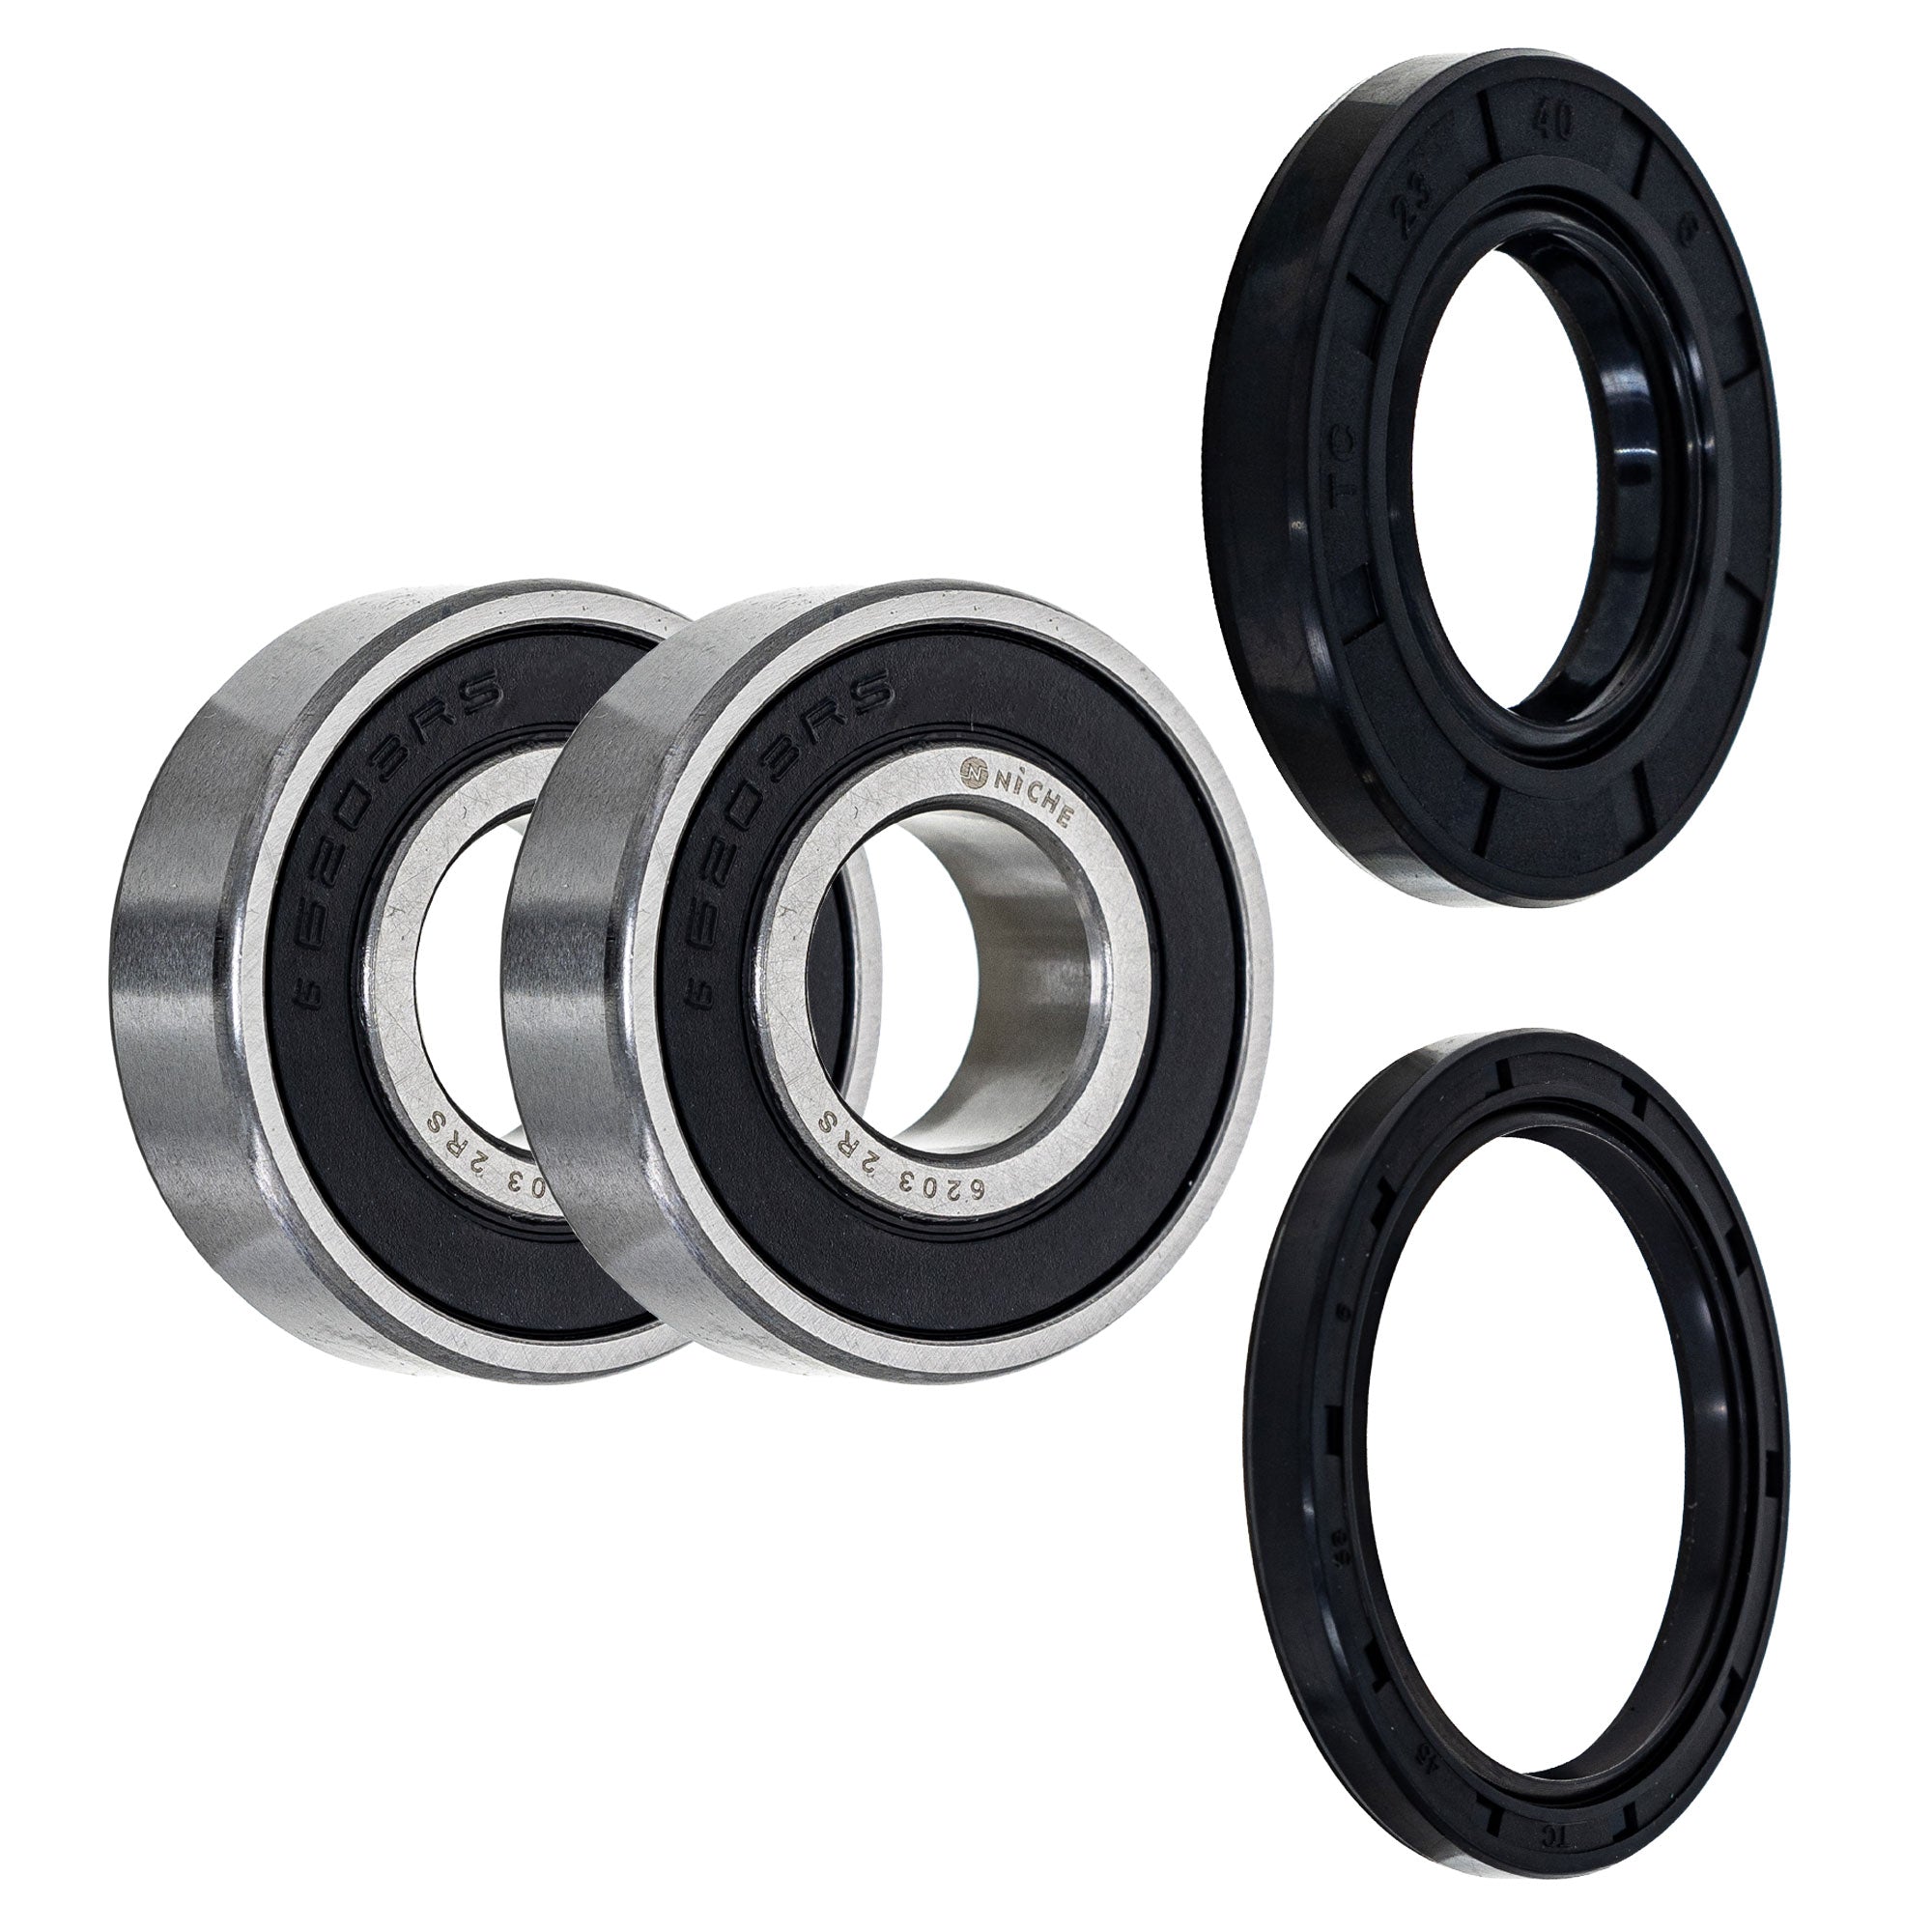 Wheel Bearing Seal Kit for zOTHER Ref No YZF600R NICHE MK1009043